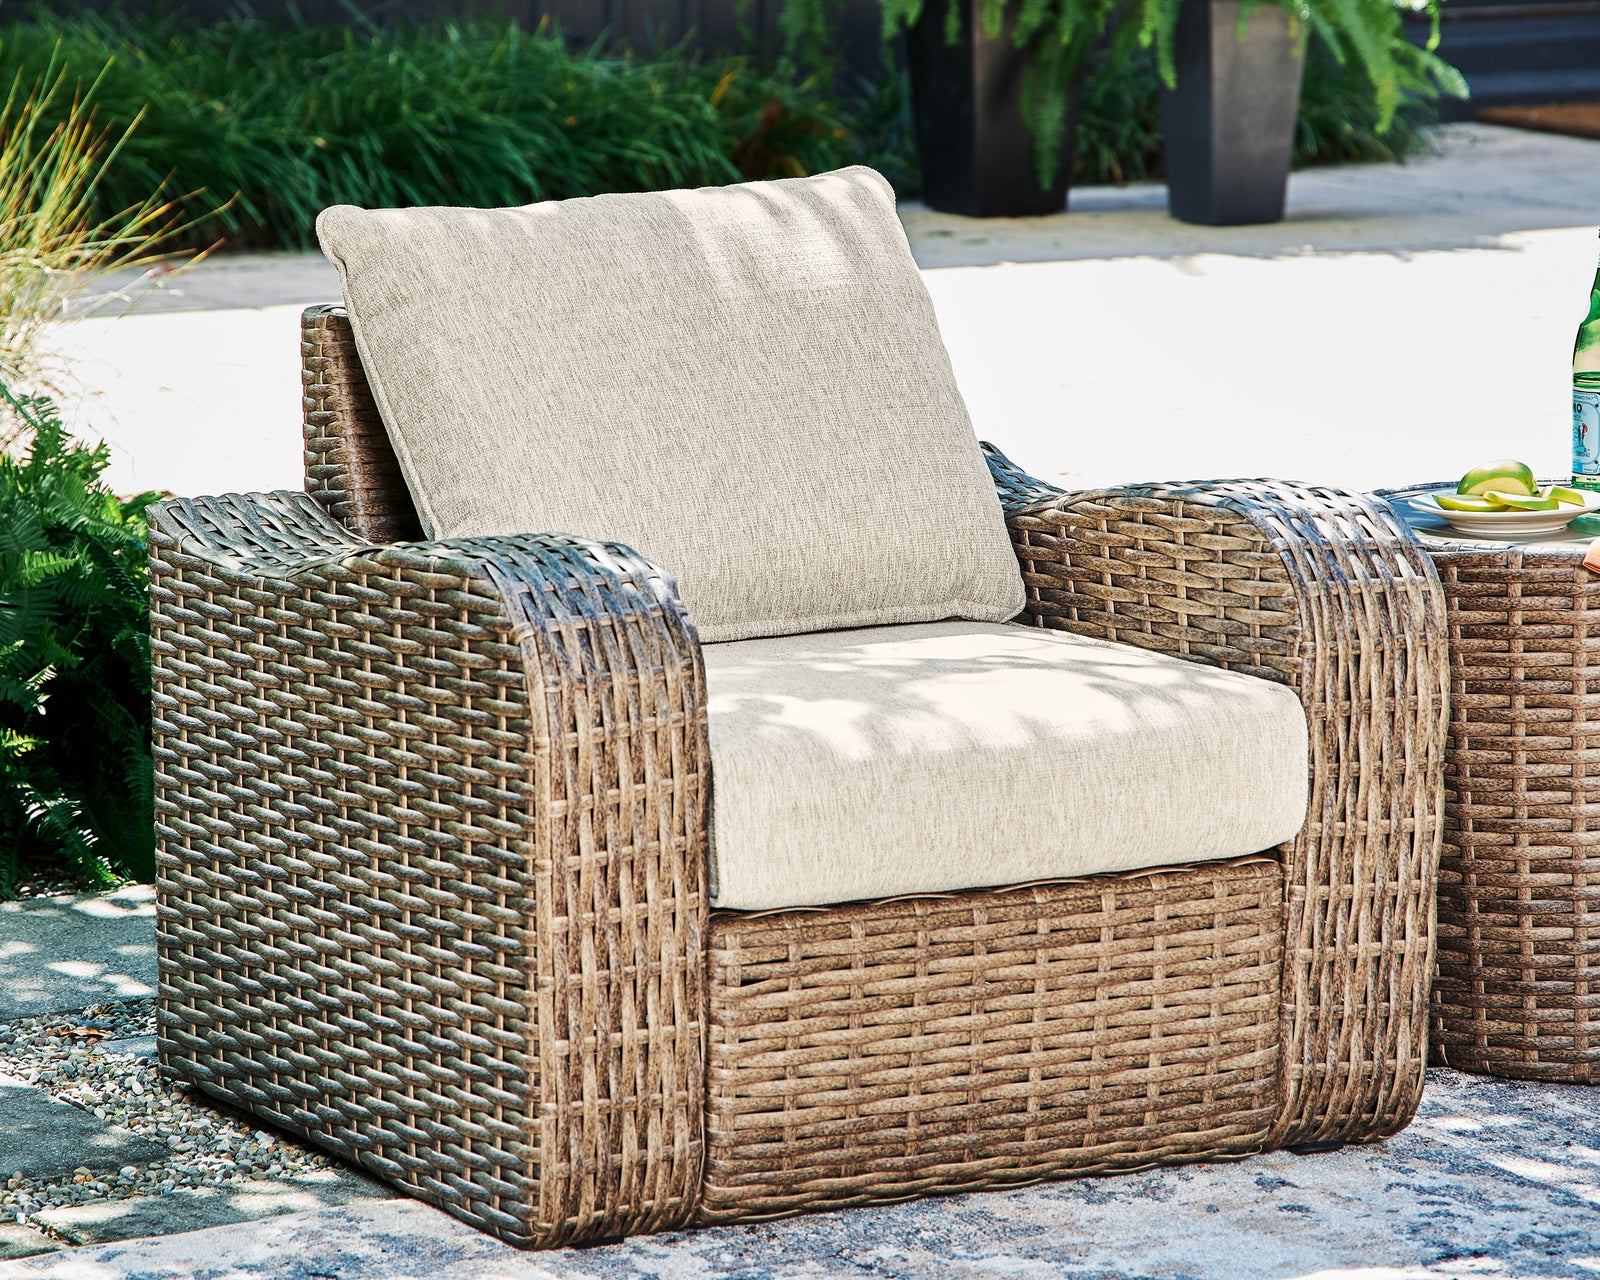 Sandy Beige Bloom Outdoor Sofa And Loveseat With Lounge Chair And Ottoman